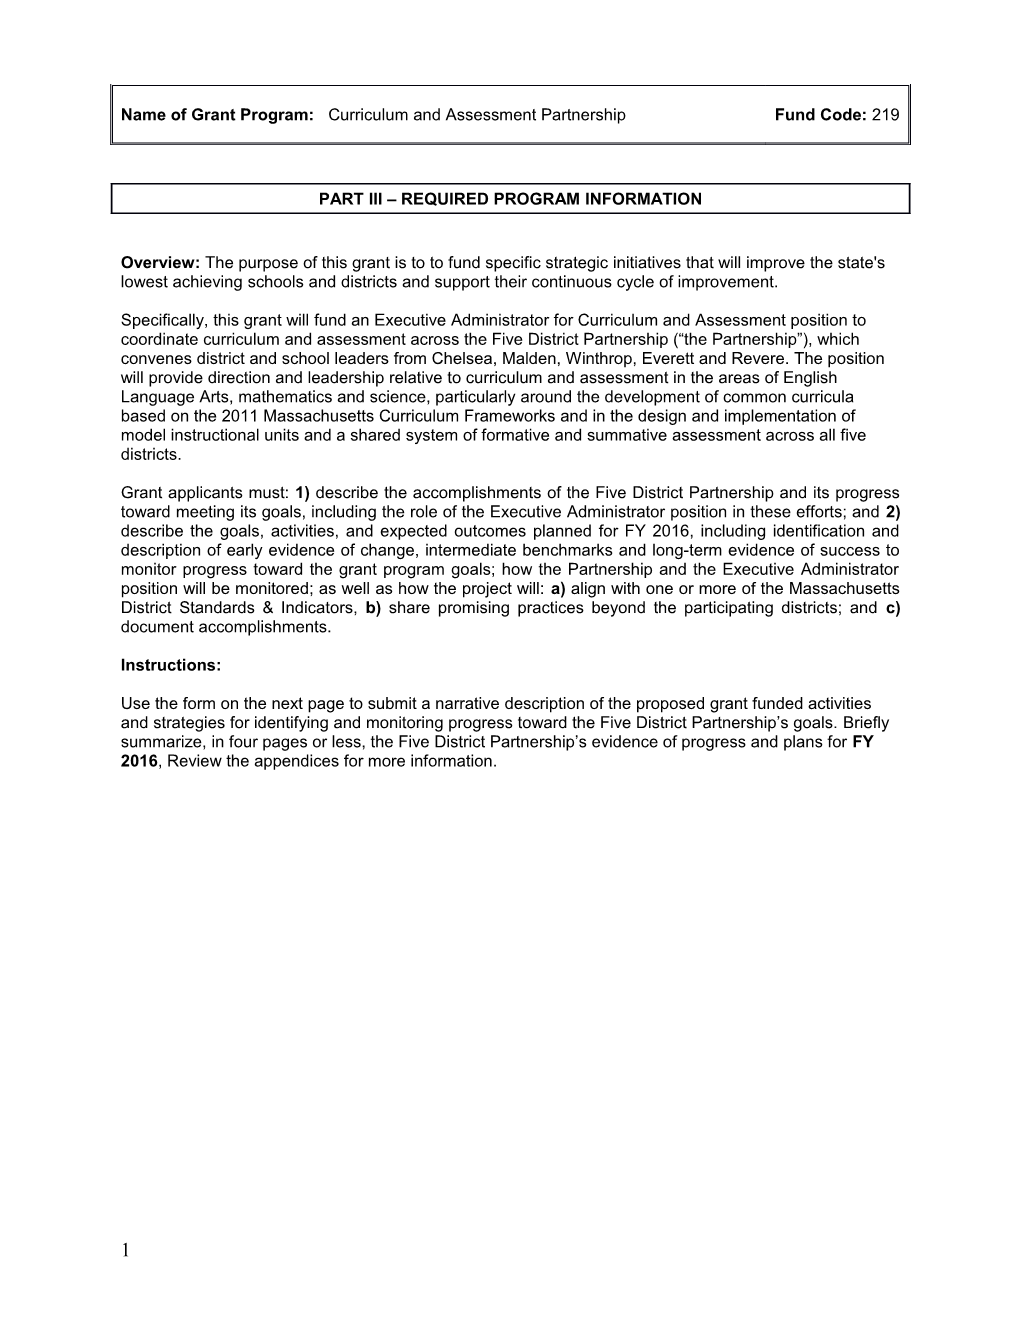 FY2016 Fund Code 219 Curriculum and Assessment Partnership Part III